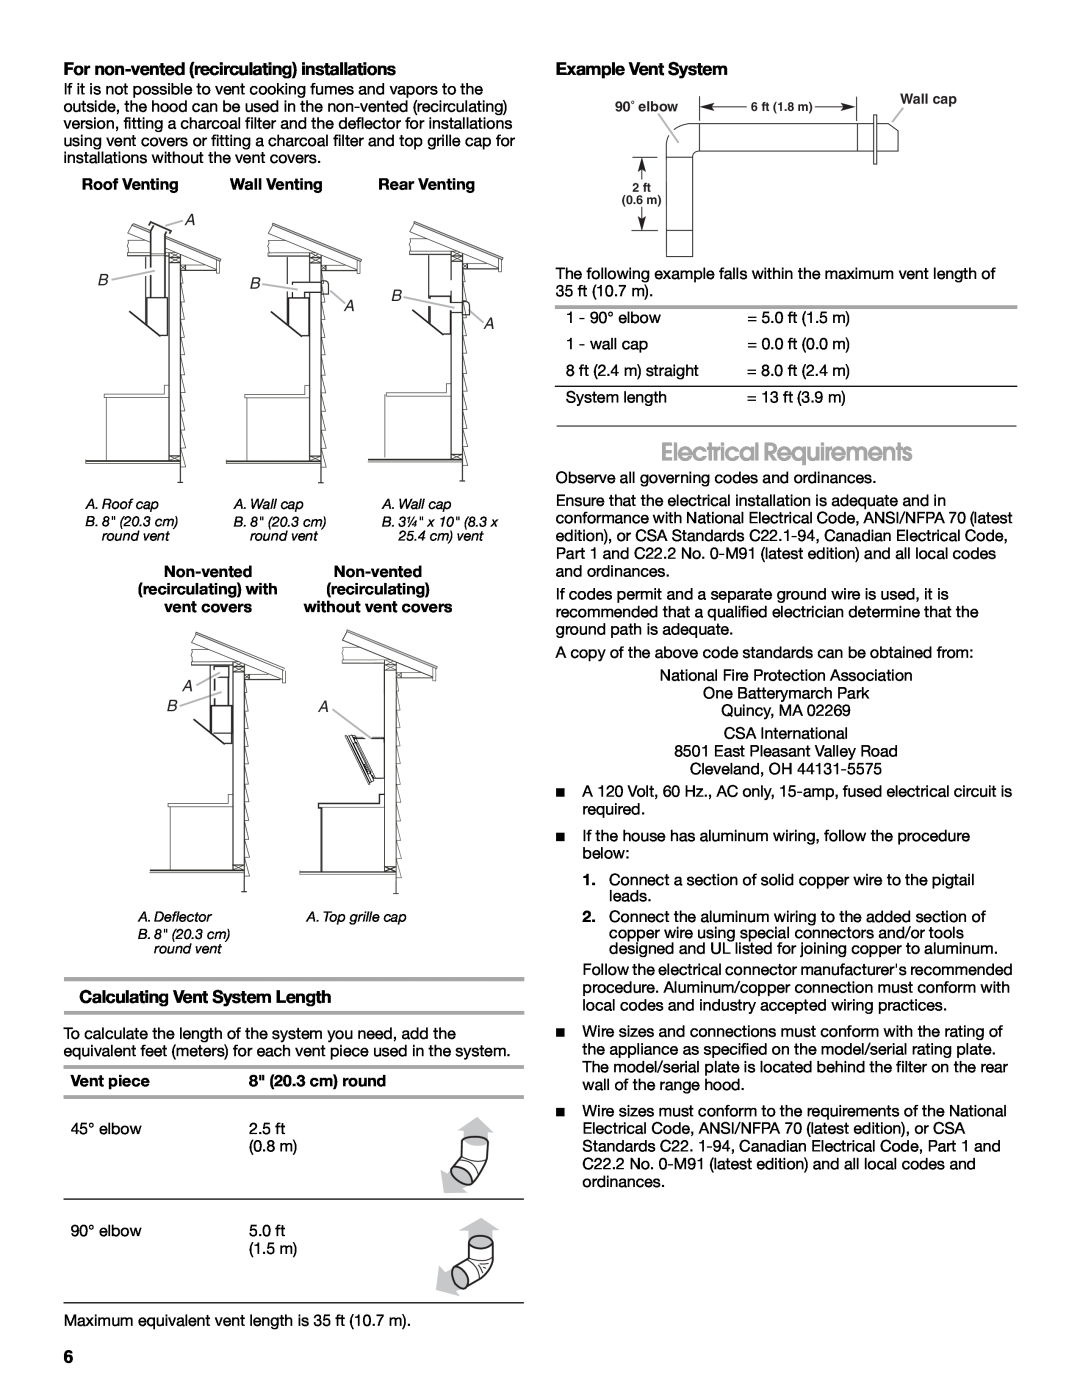 Jenn-Air W10274314C Electrical Requirements, For non-ventedrecirculating installations, Example Vent System, Non-vented 